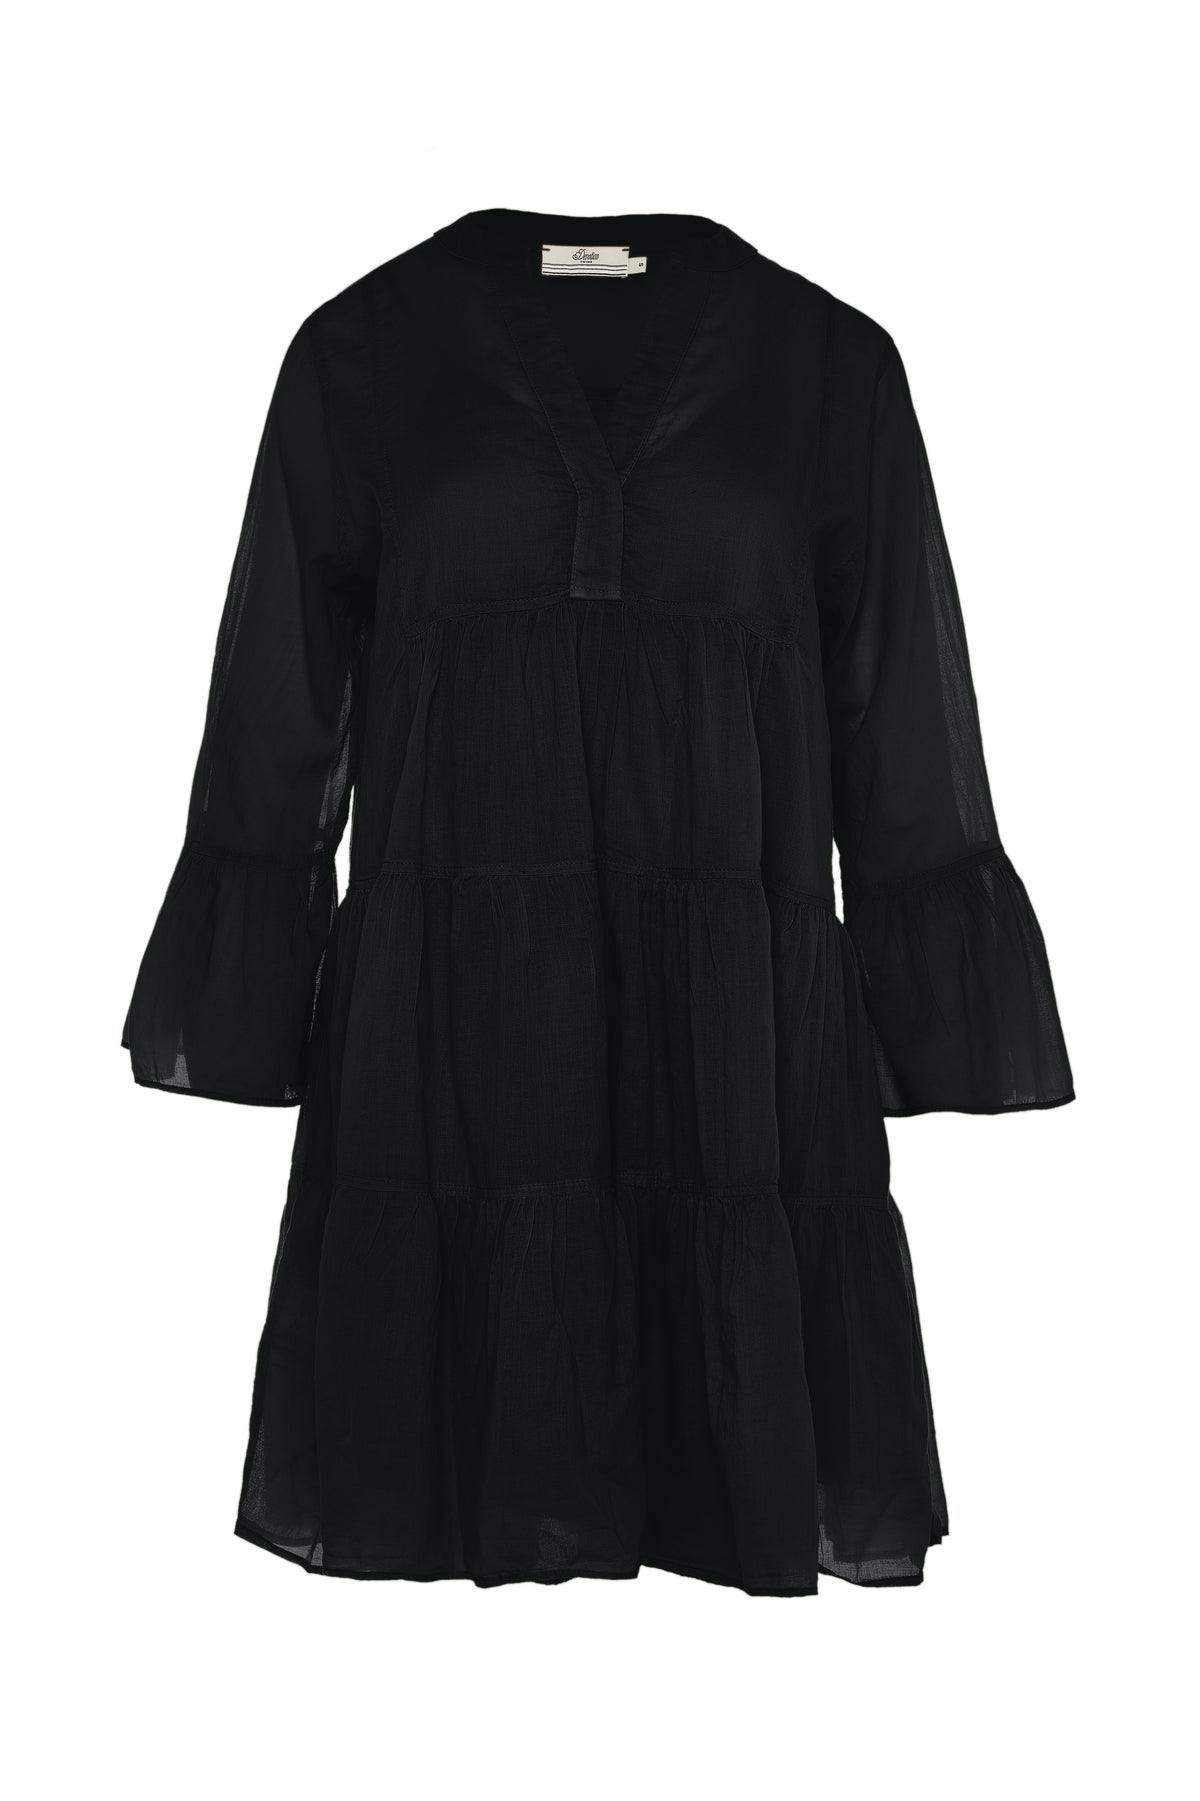 Black knee length lightweight beach dress  with long fluted sleeves and tiered skirt with notch neckline